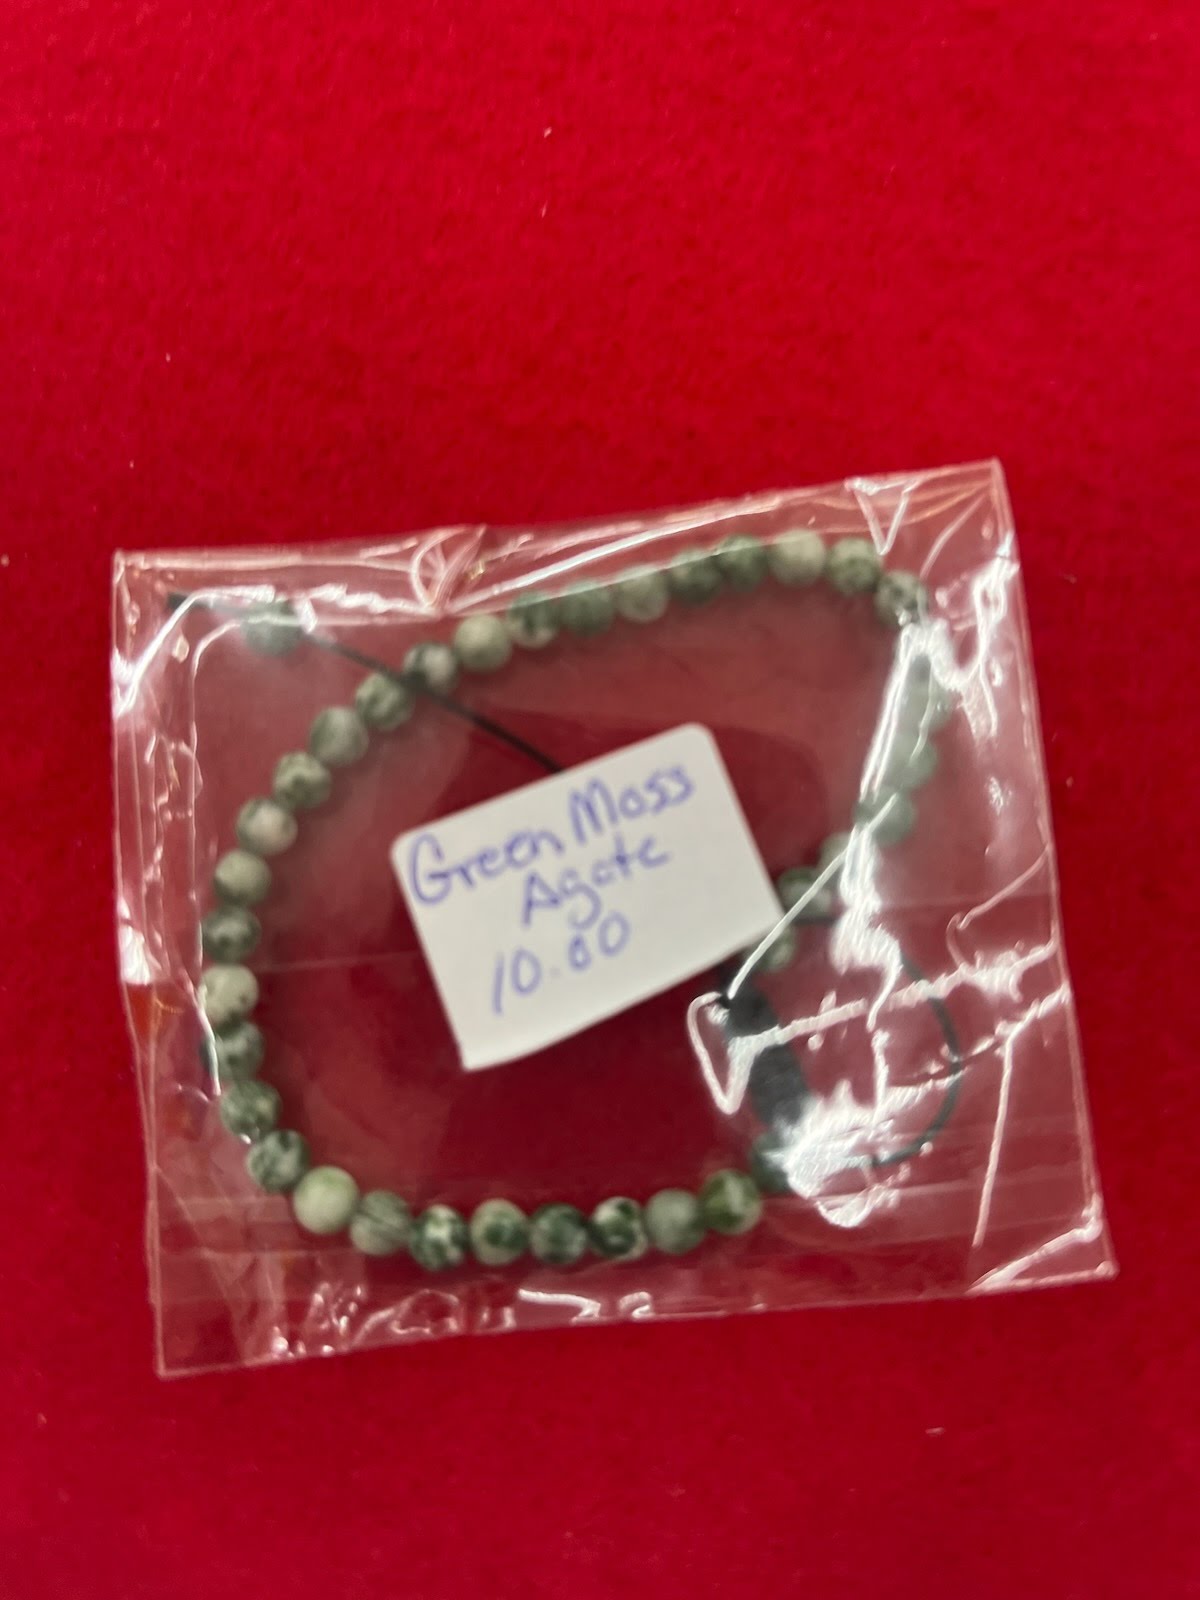 A small bag of jewelry with a tag on it.